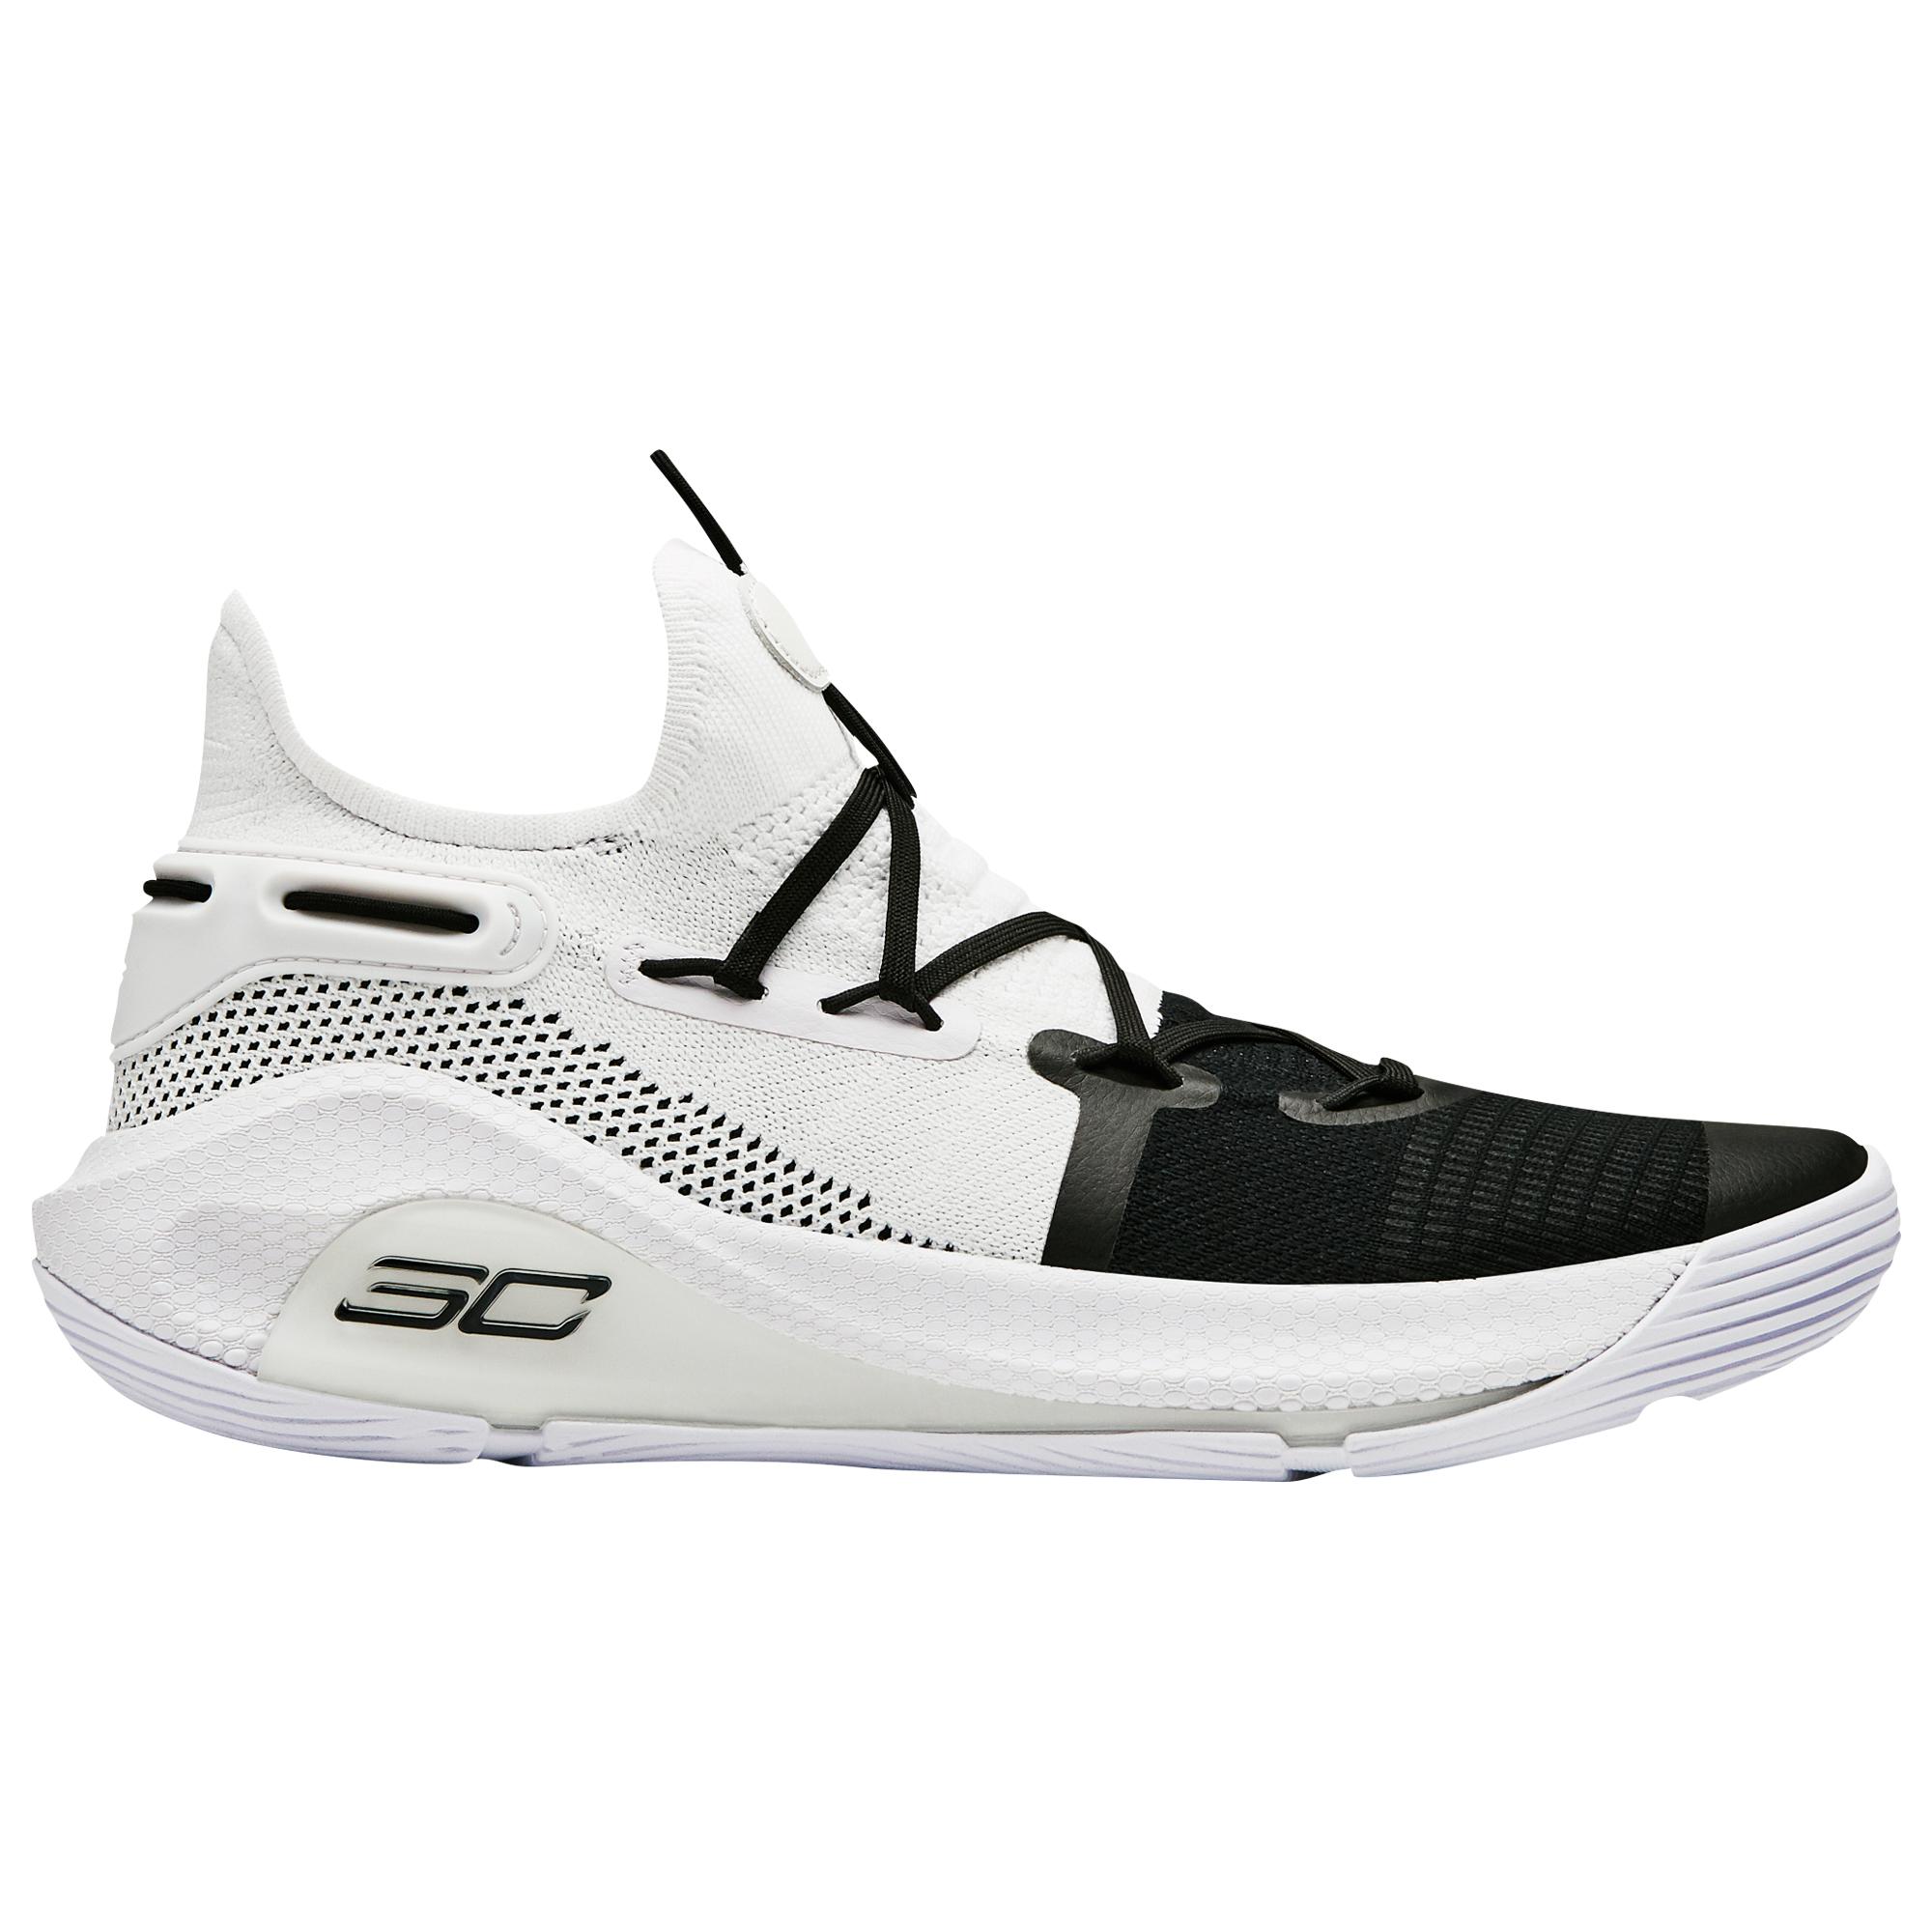 stephen curry shoes black and white